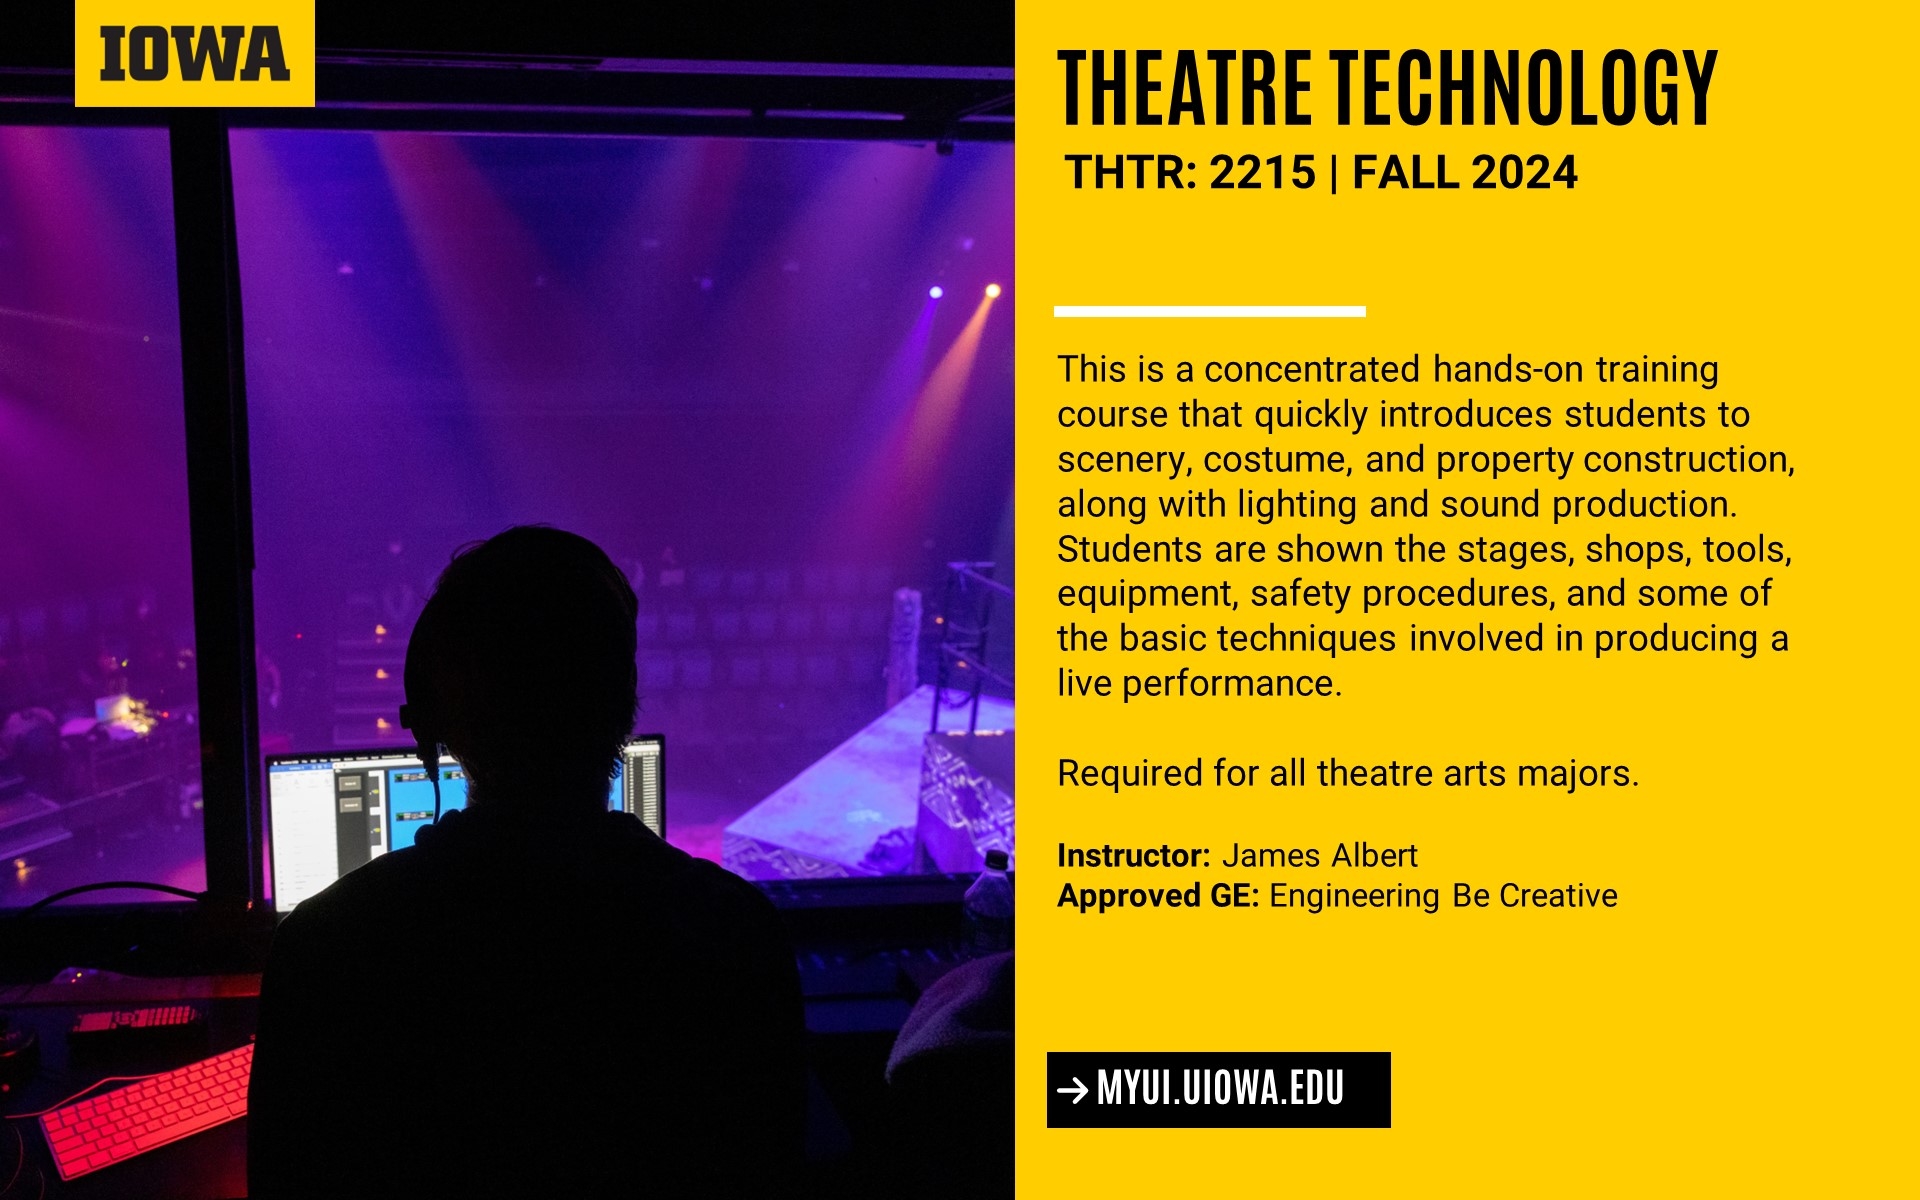 Fall 24 Theatre Technology